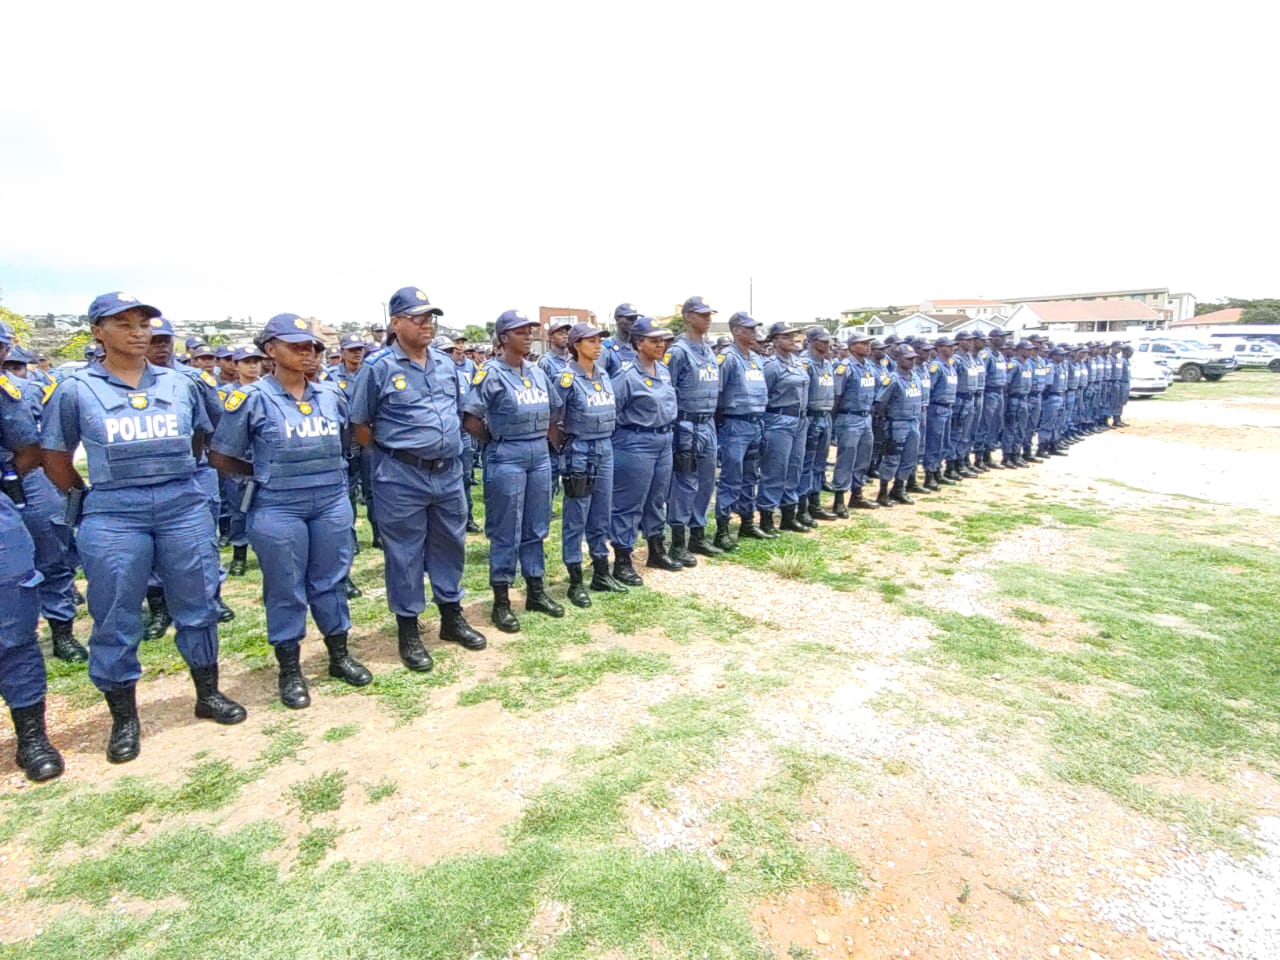 Newly trained Constables show their mettle on first day of work in Nelson Mandela Bay